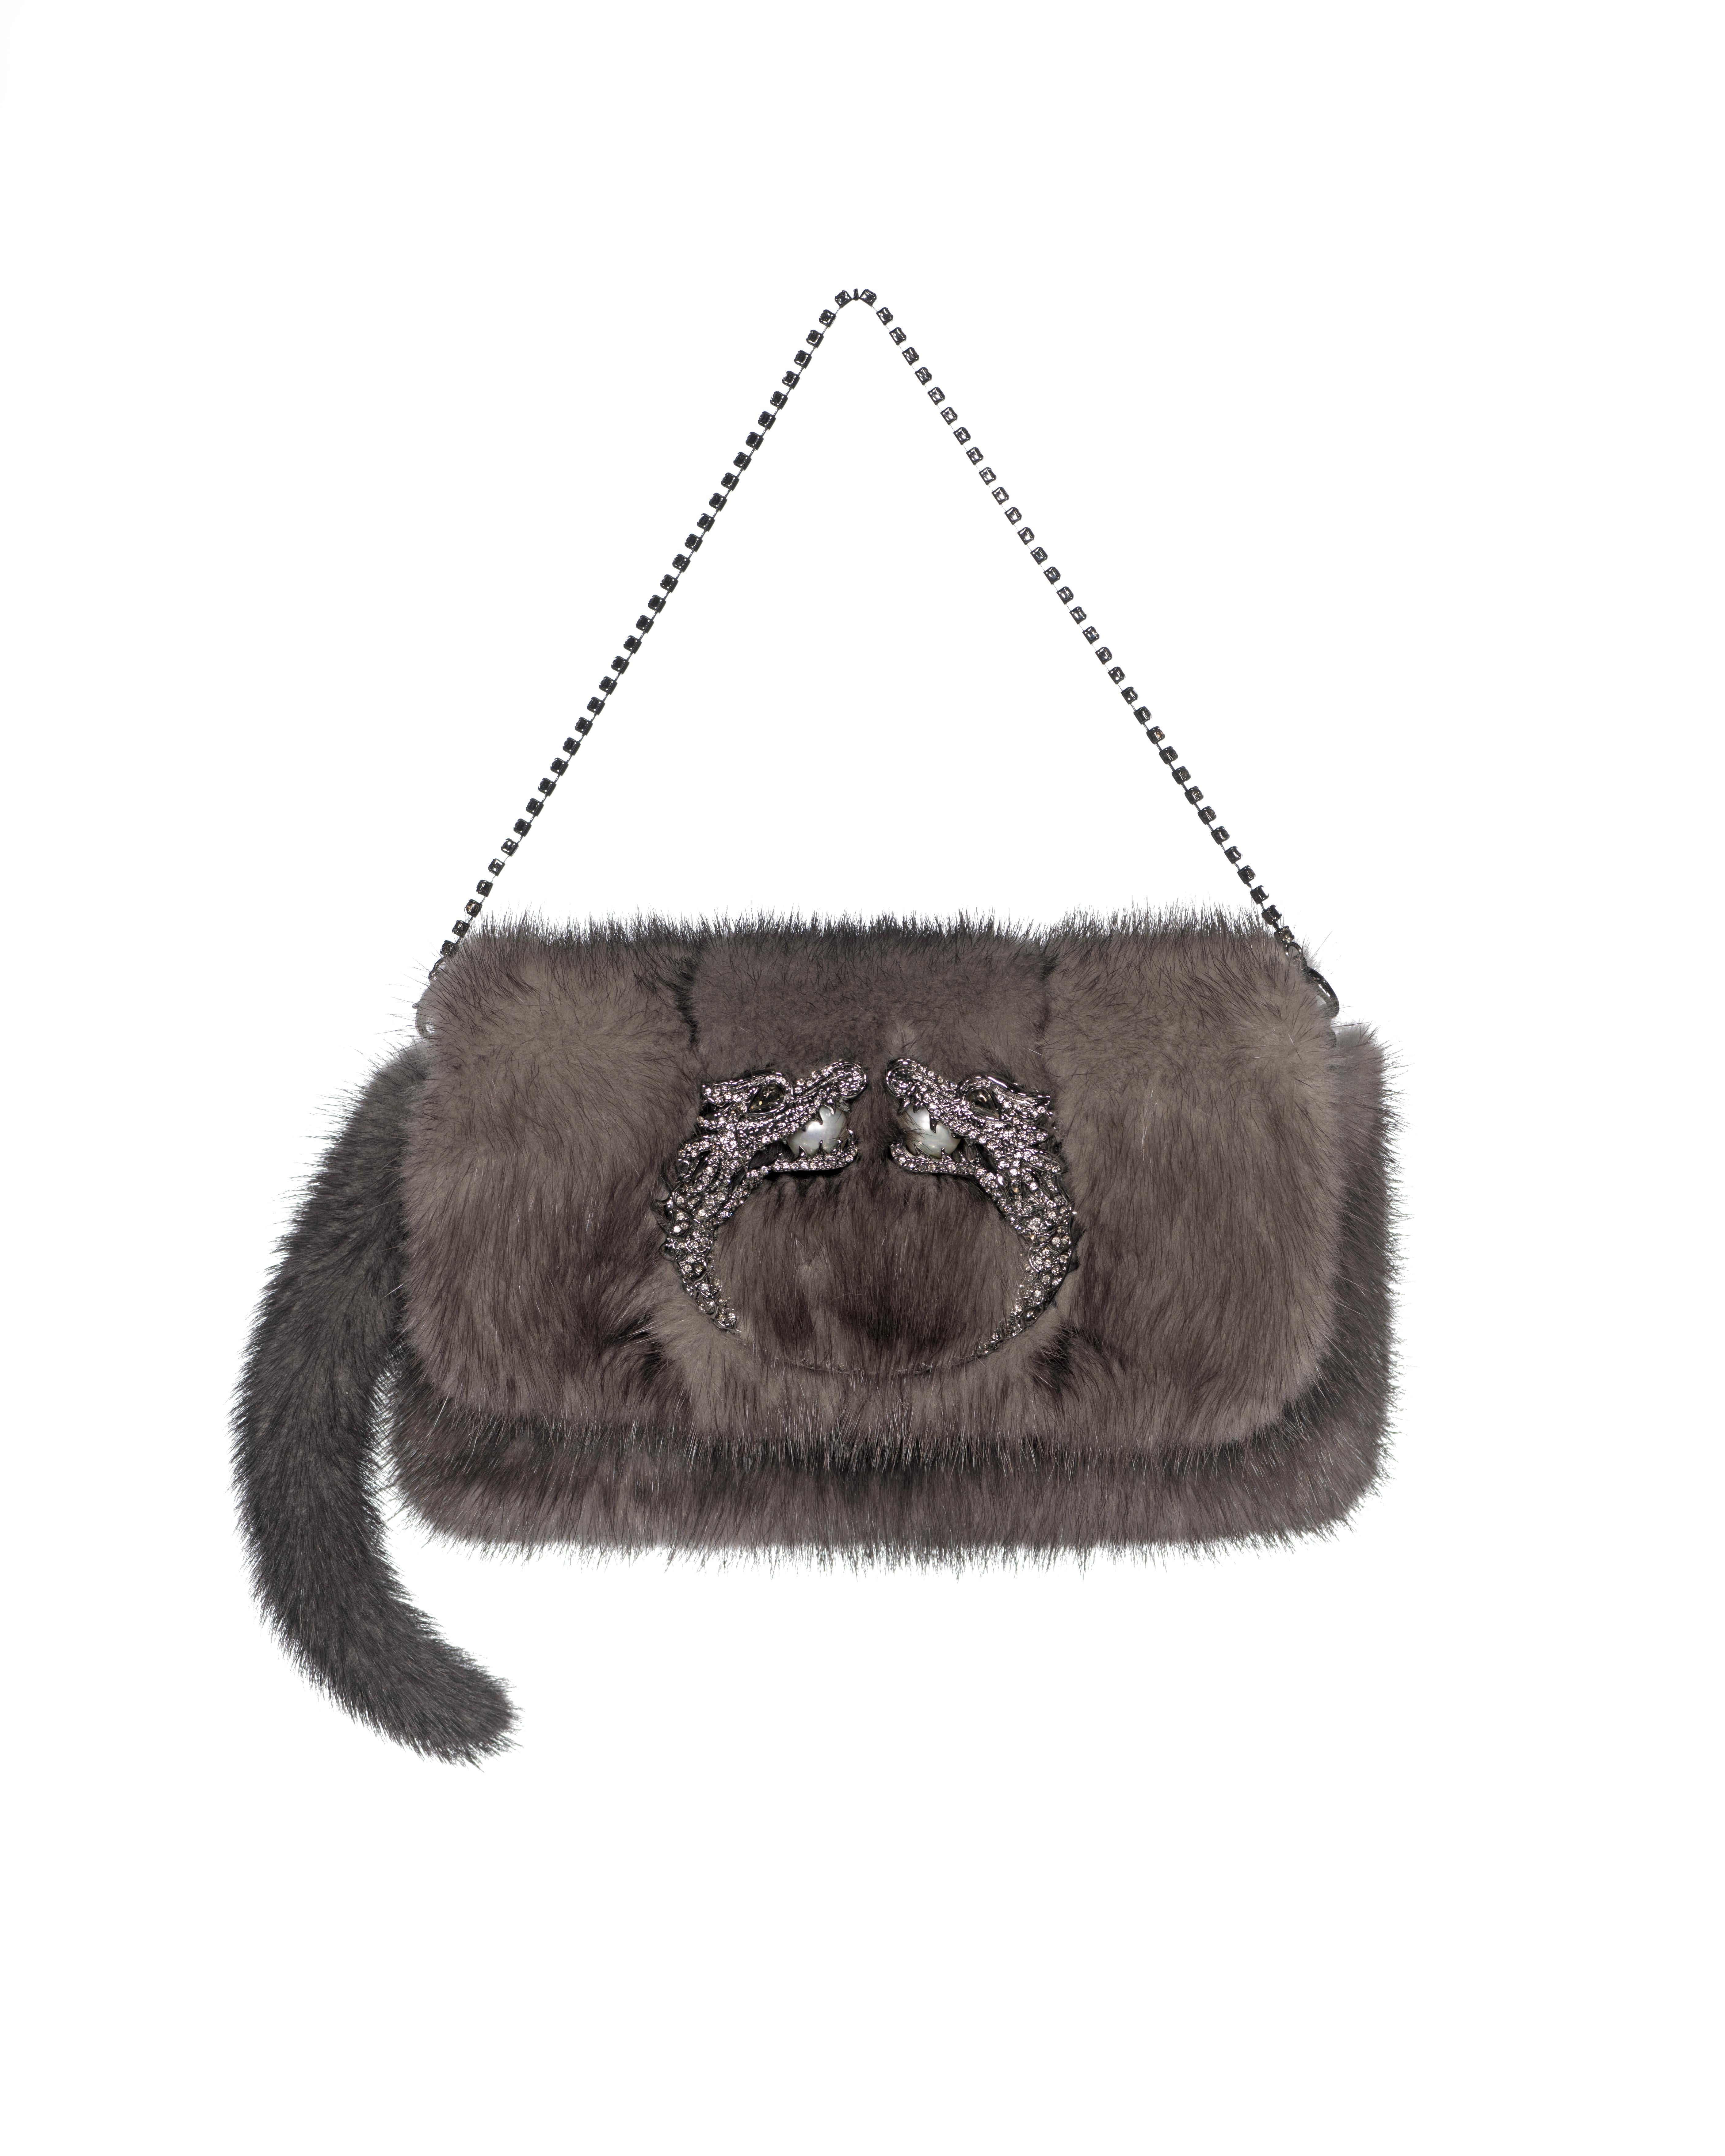 ▪ Archival Gucci Mink Fur Evening Mini Clutch / Bag
▪ Creative Director: Tom Ford
▪ Fall-Winter 2004
▪ These evening mink fur mini bags featured in the final segment of Tom Ford's last collection for Gucci and starred in the brand's advertising